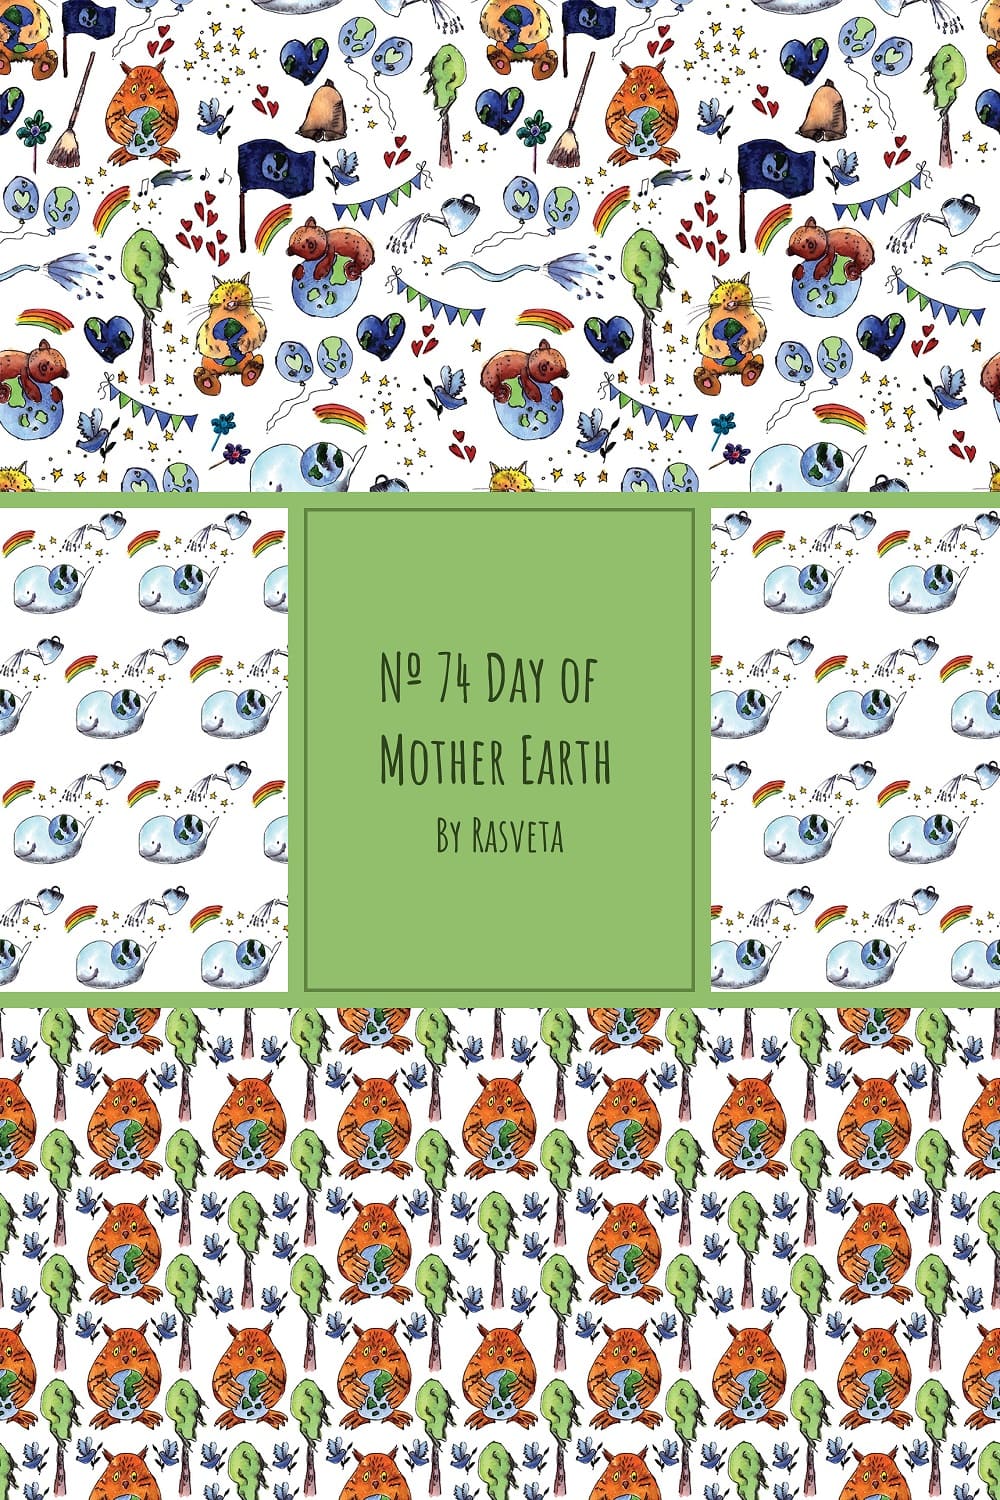 Watercolor drawings of flora and fauna for Mother Earth Day.